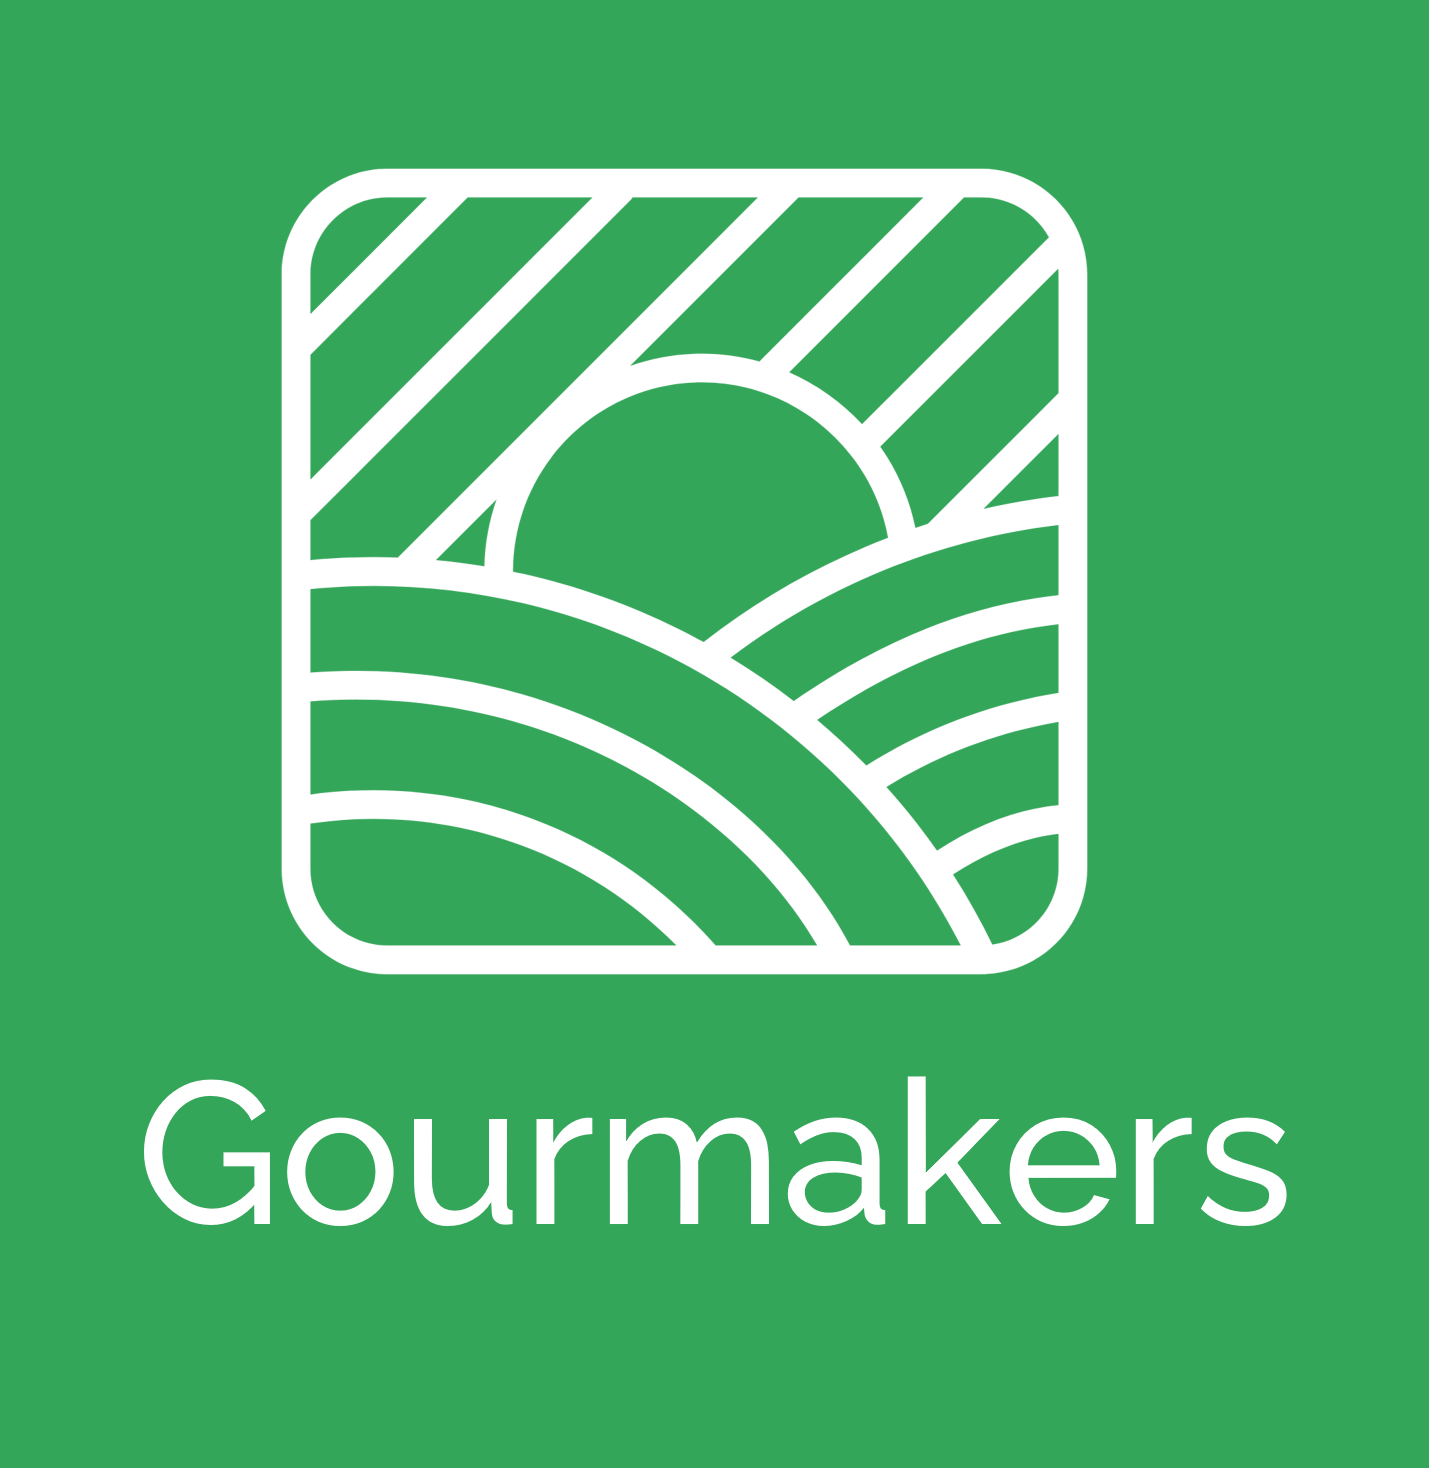 A white sun and mountains line drawing above text that reads 'Gourmakers' inside a green square